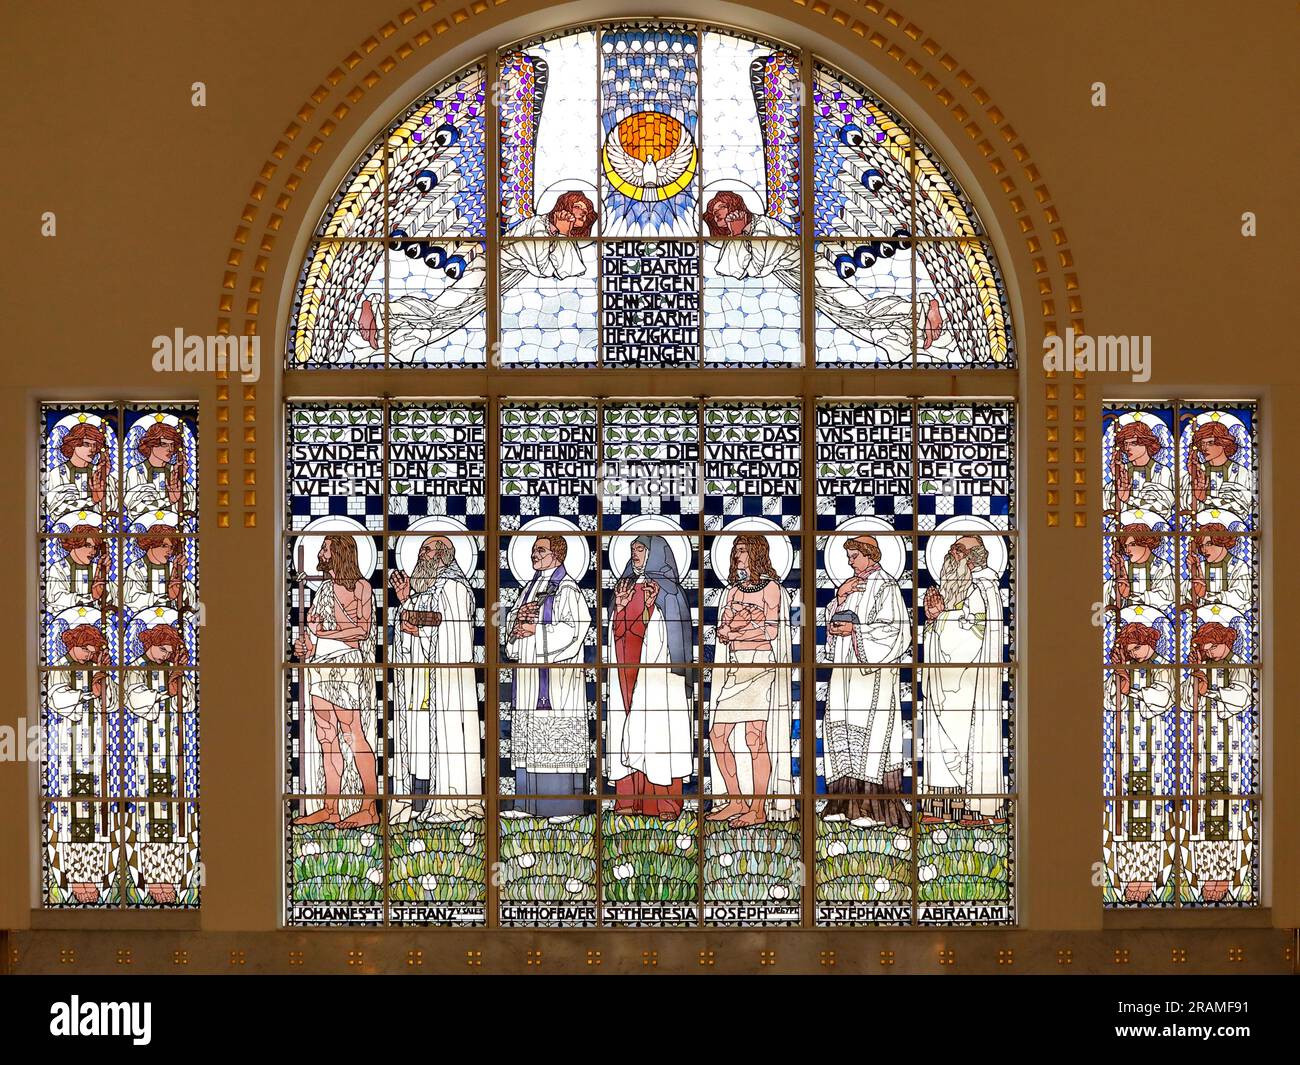 Stained glass window depicting Christian ideas and teachings in the Church of St. Leopold am Steinhof, Vienna Stock Photo